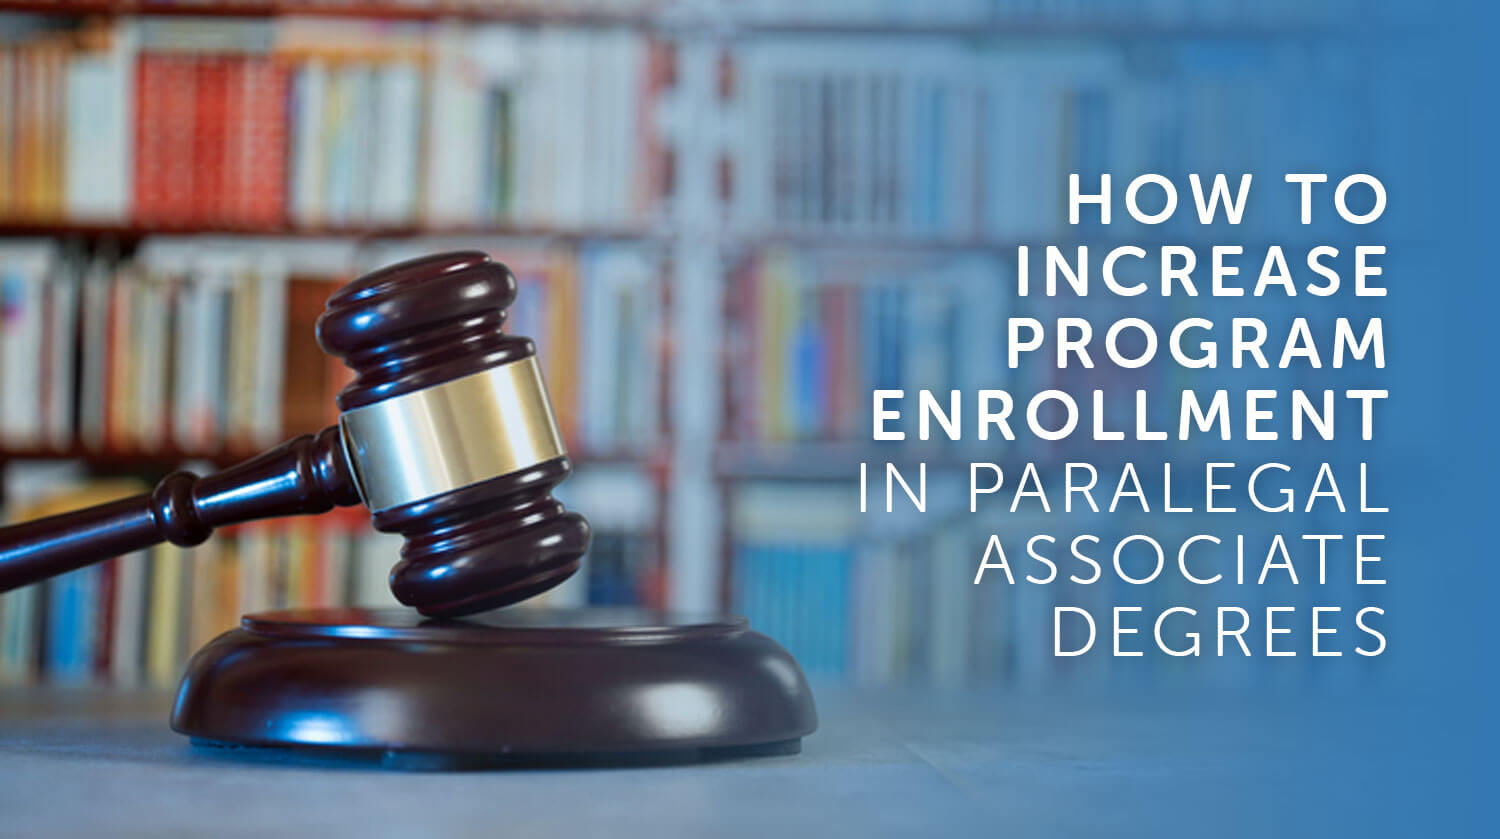 How to Increase Program Enrollment in Paralegal Associate Degrees